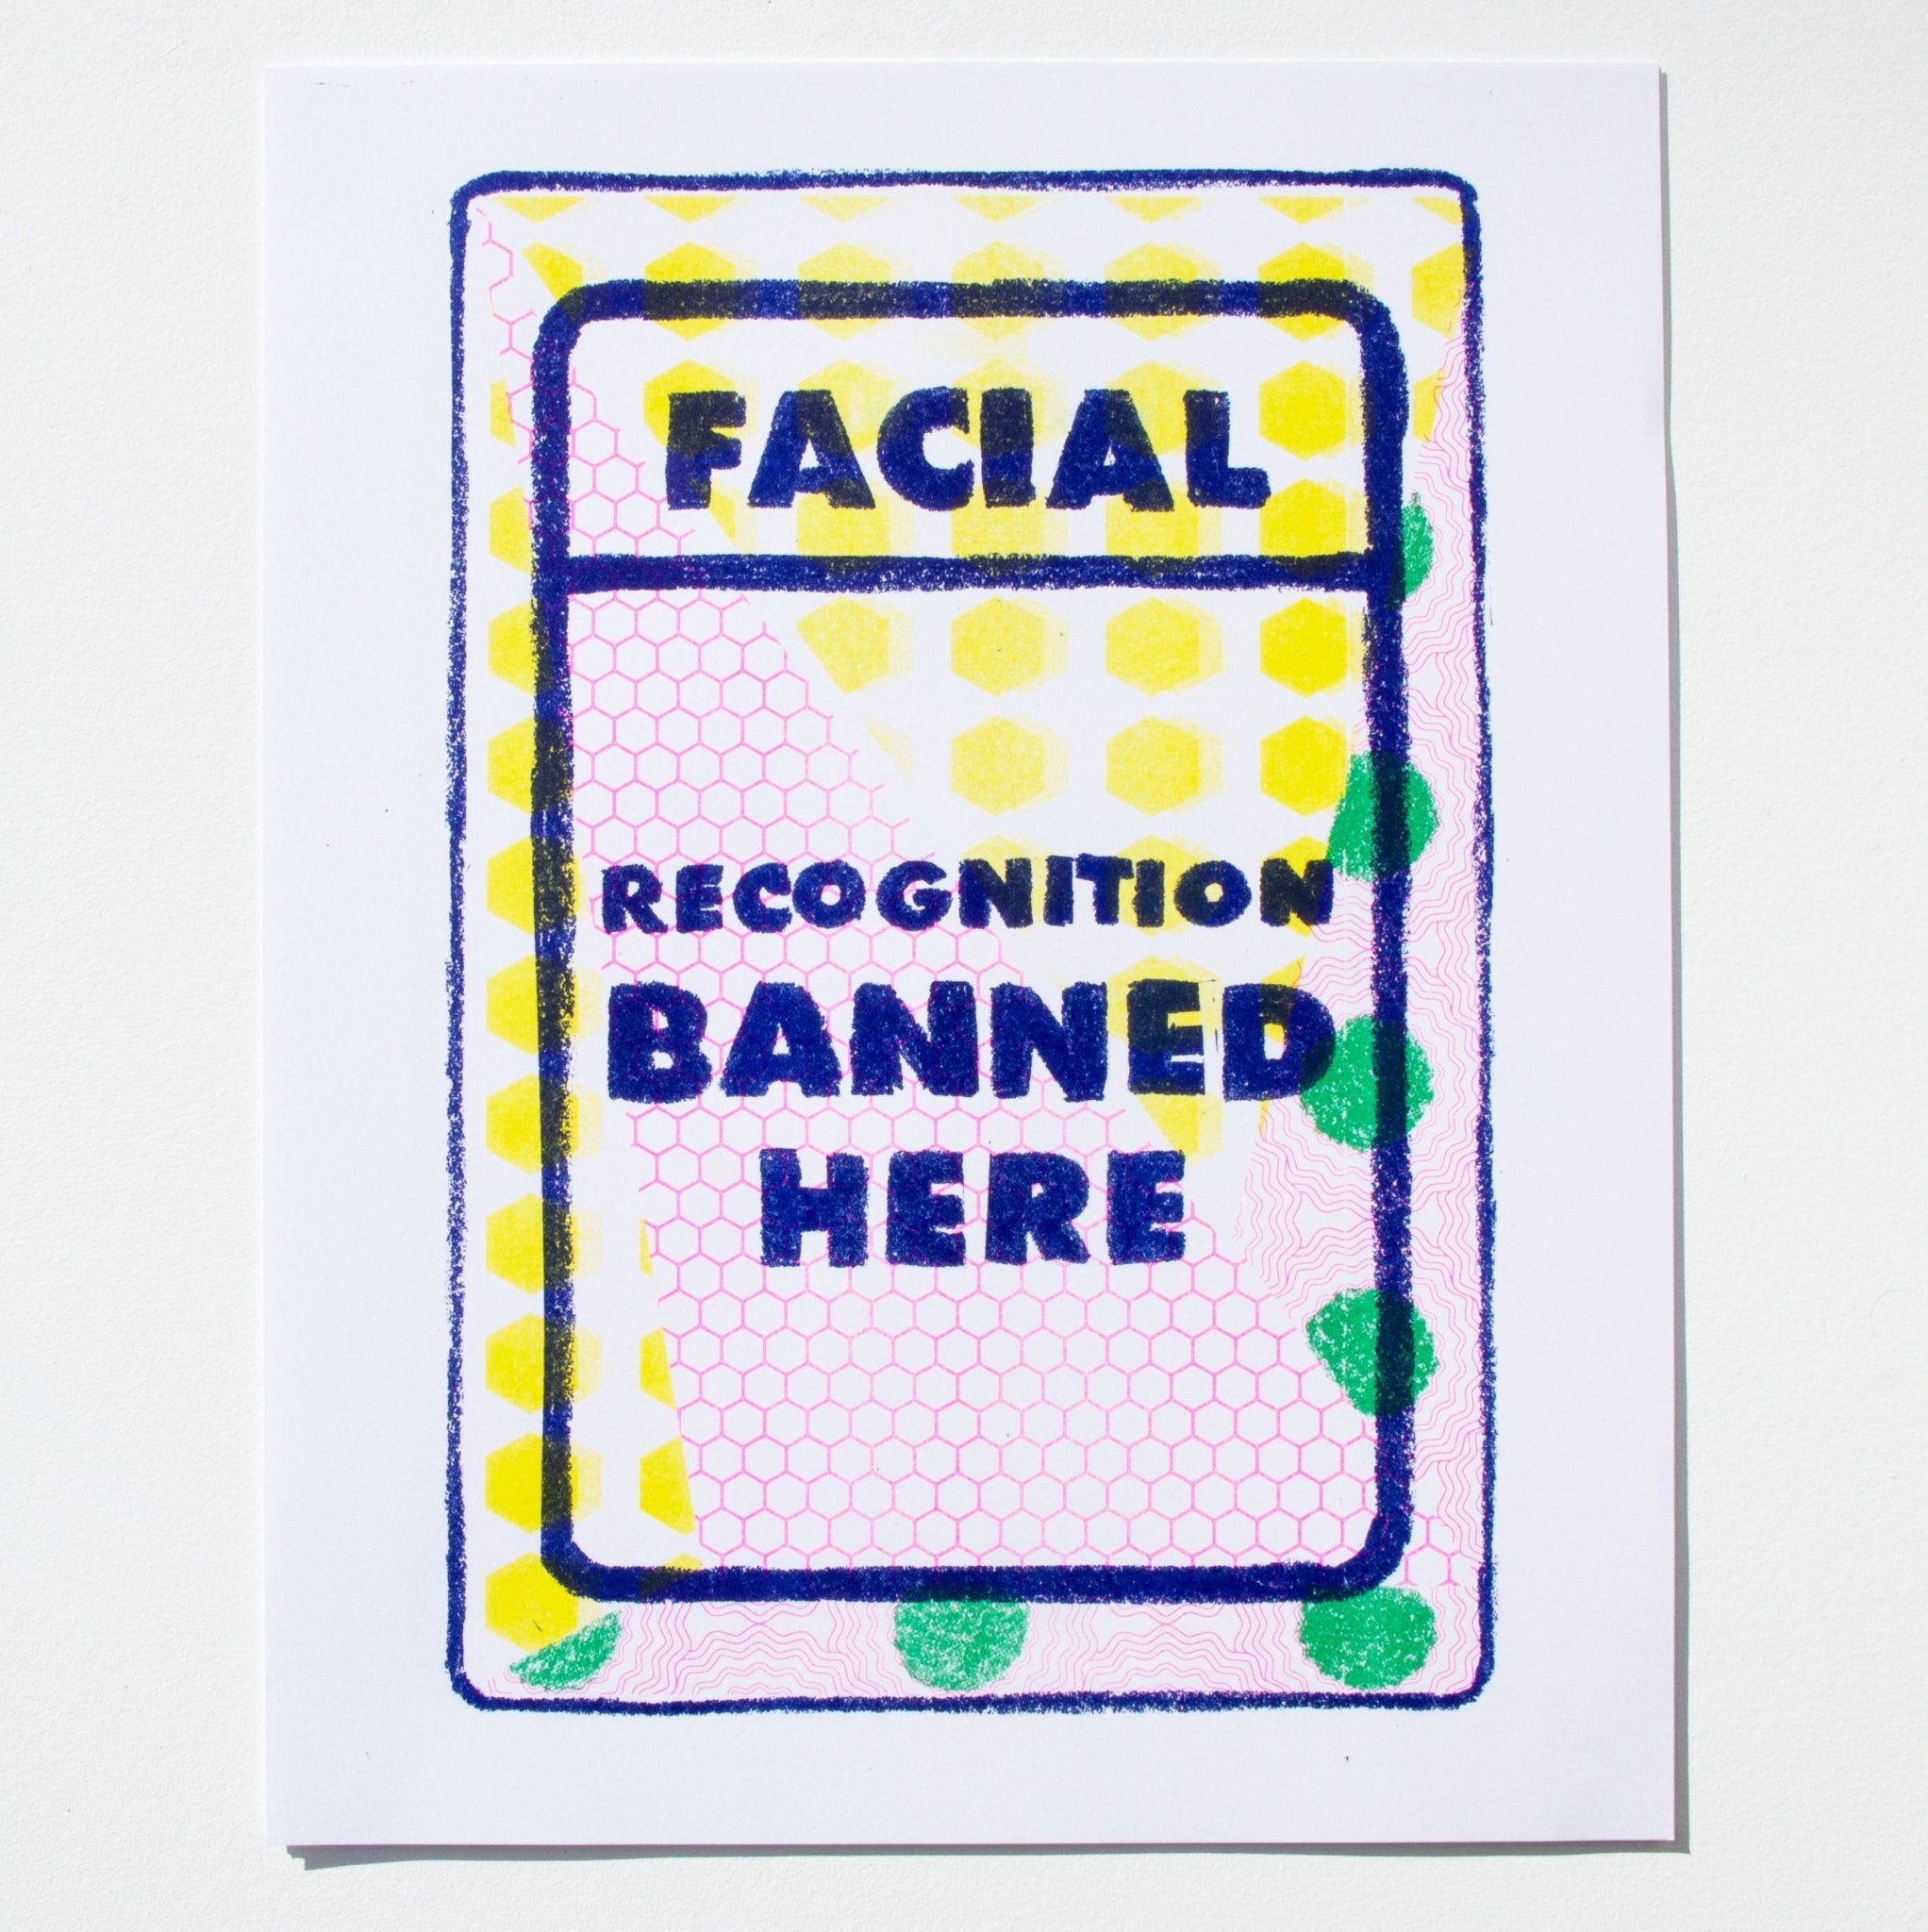 Facial Recognition Banned Here - Spiral Circle